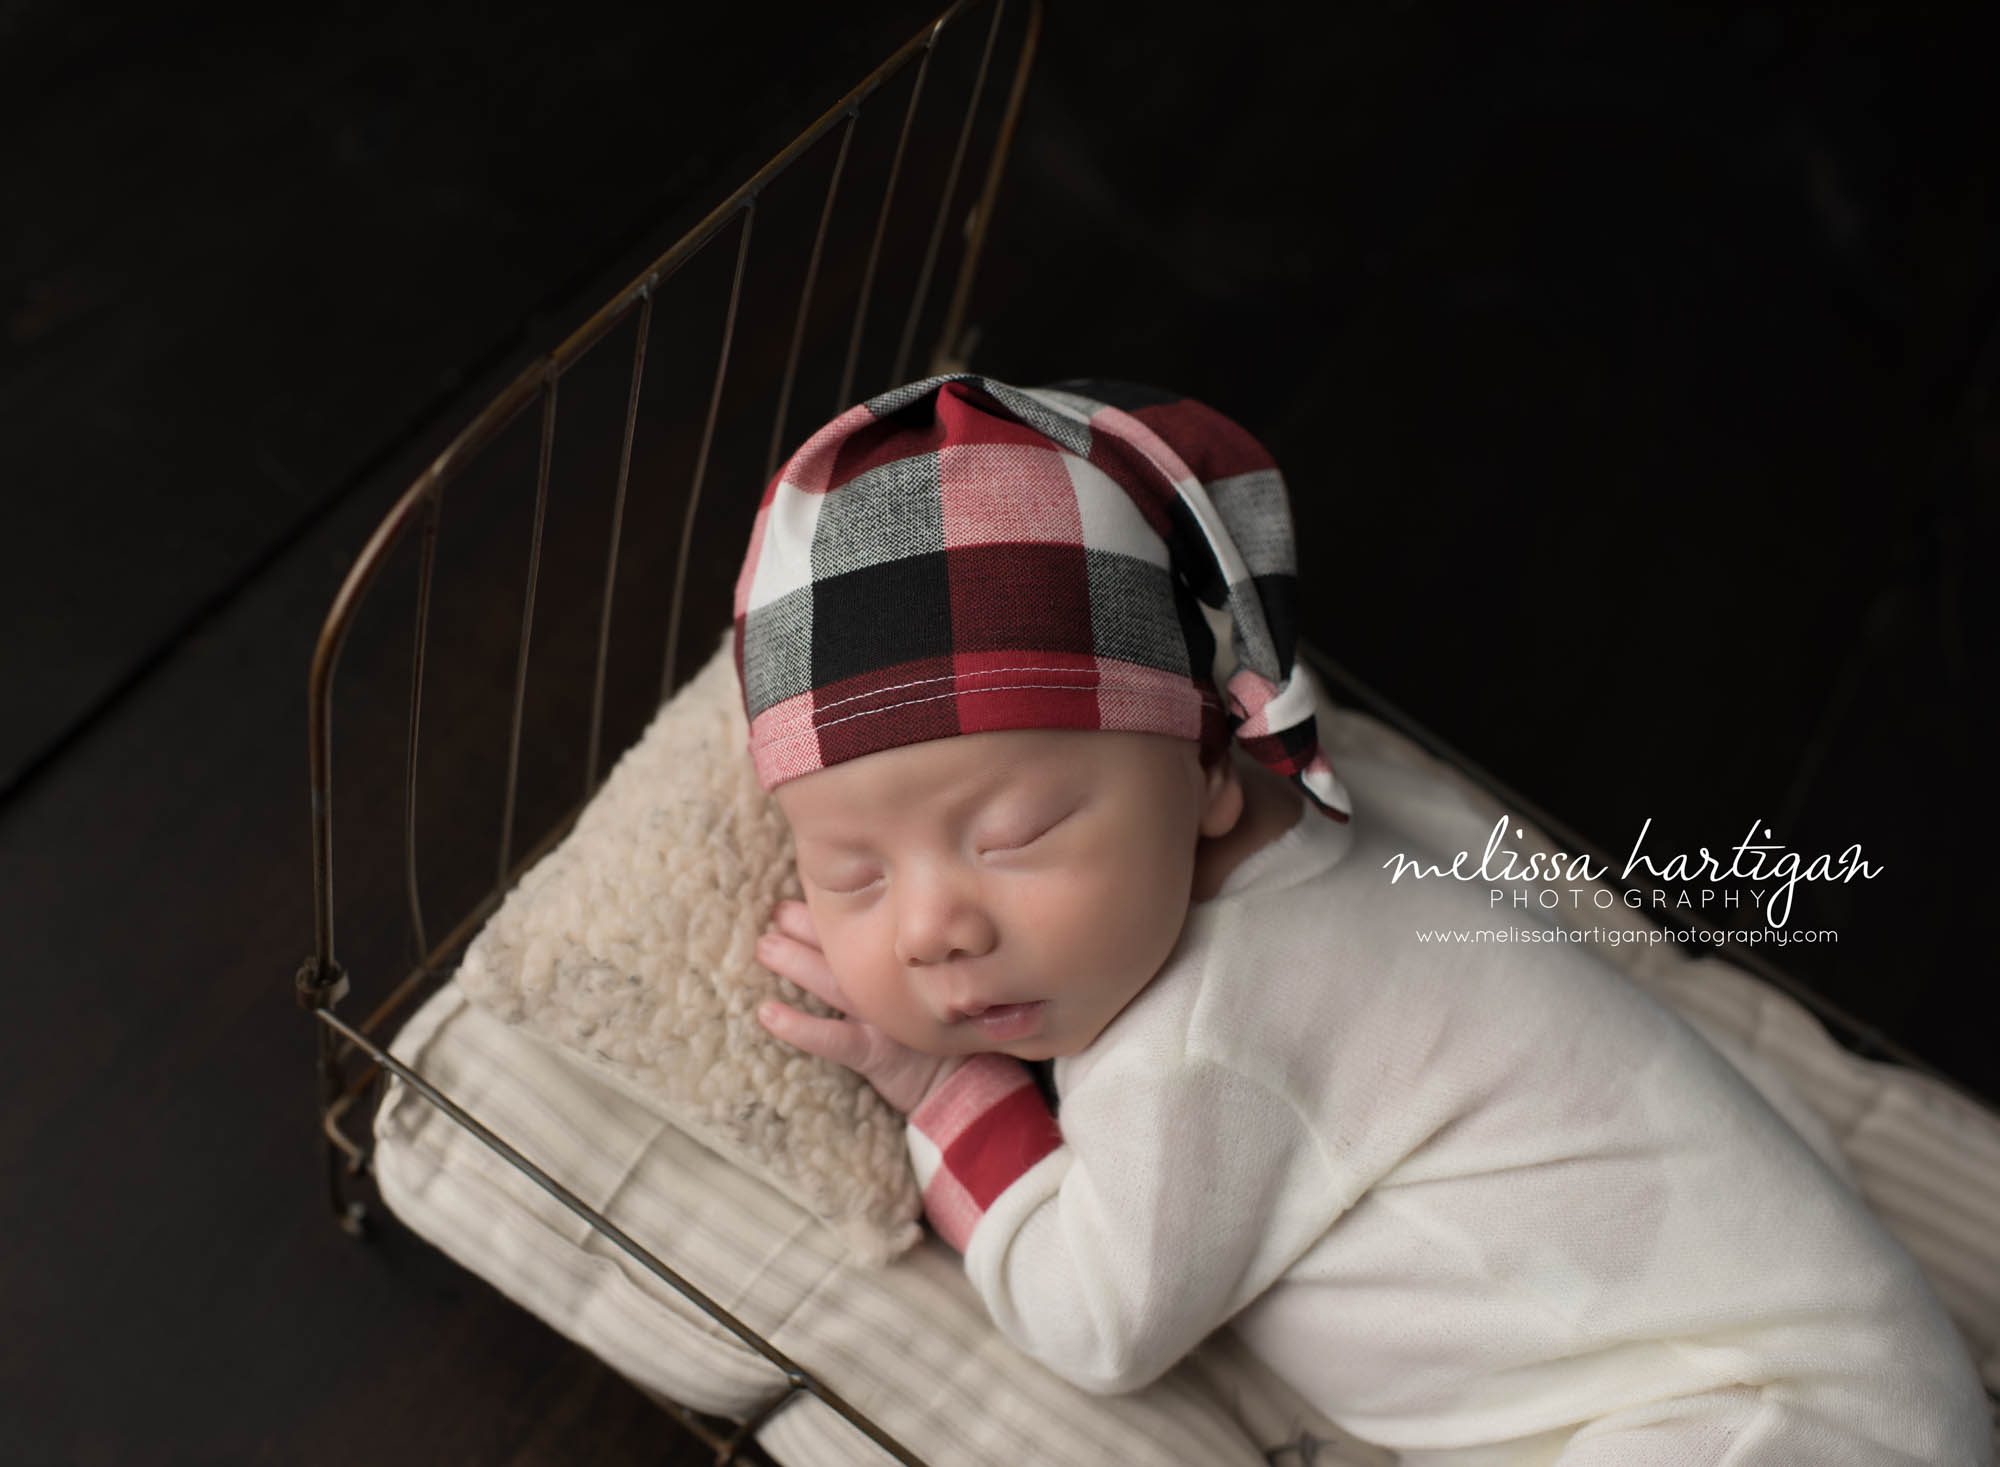 Melissa Hartigan Photography CT Newborn Photographer Taave CT Newborn Session baby boy wearing red plaid outfit and hat sleeping in little metal bed